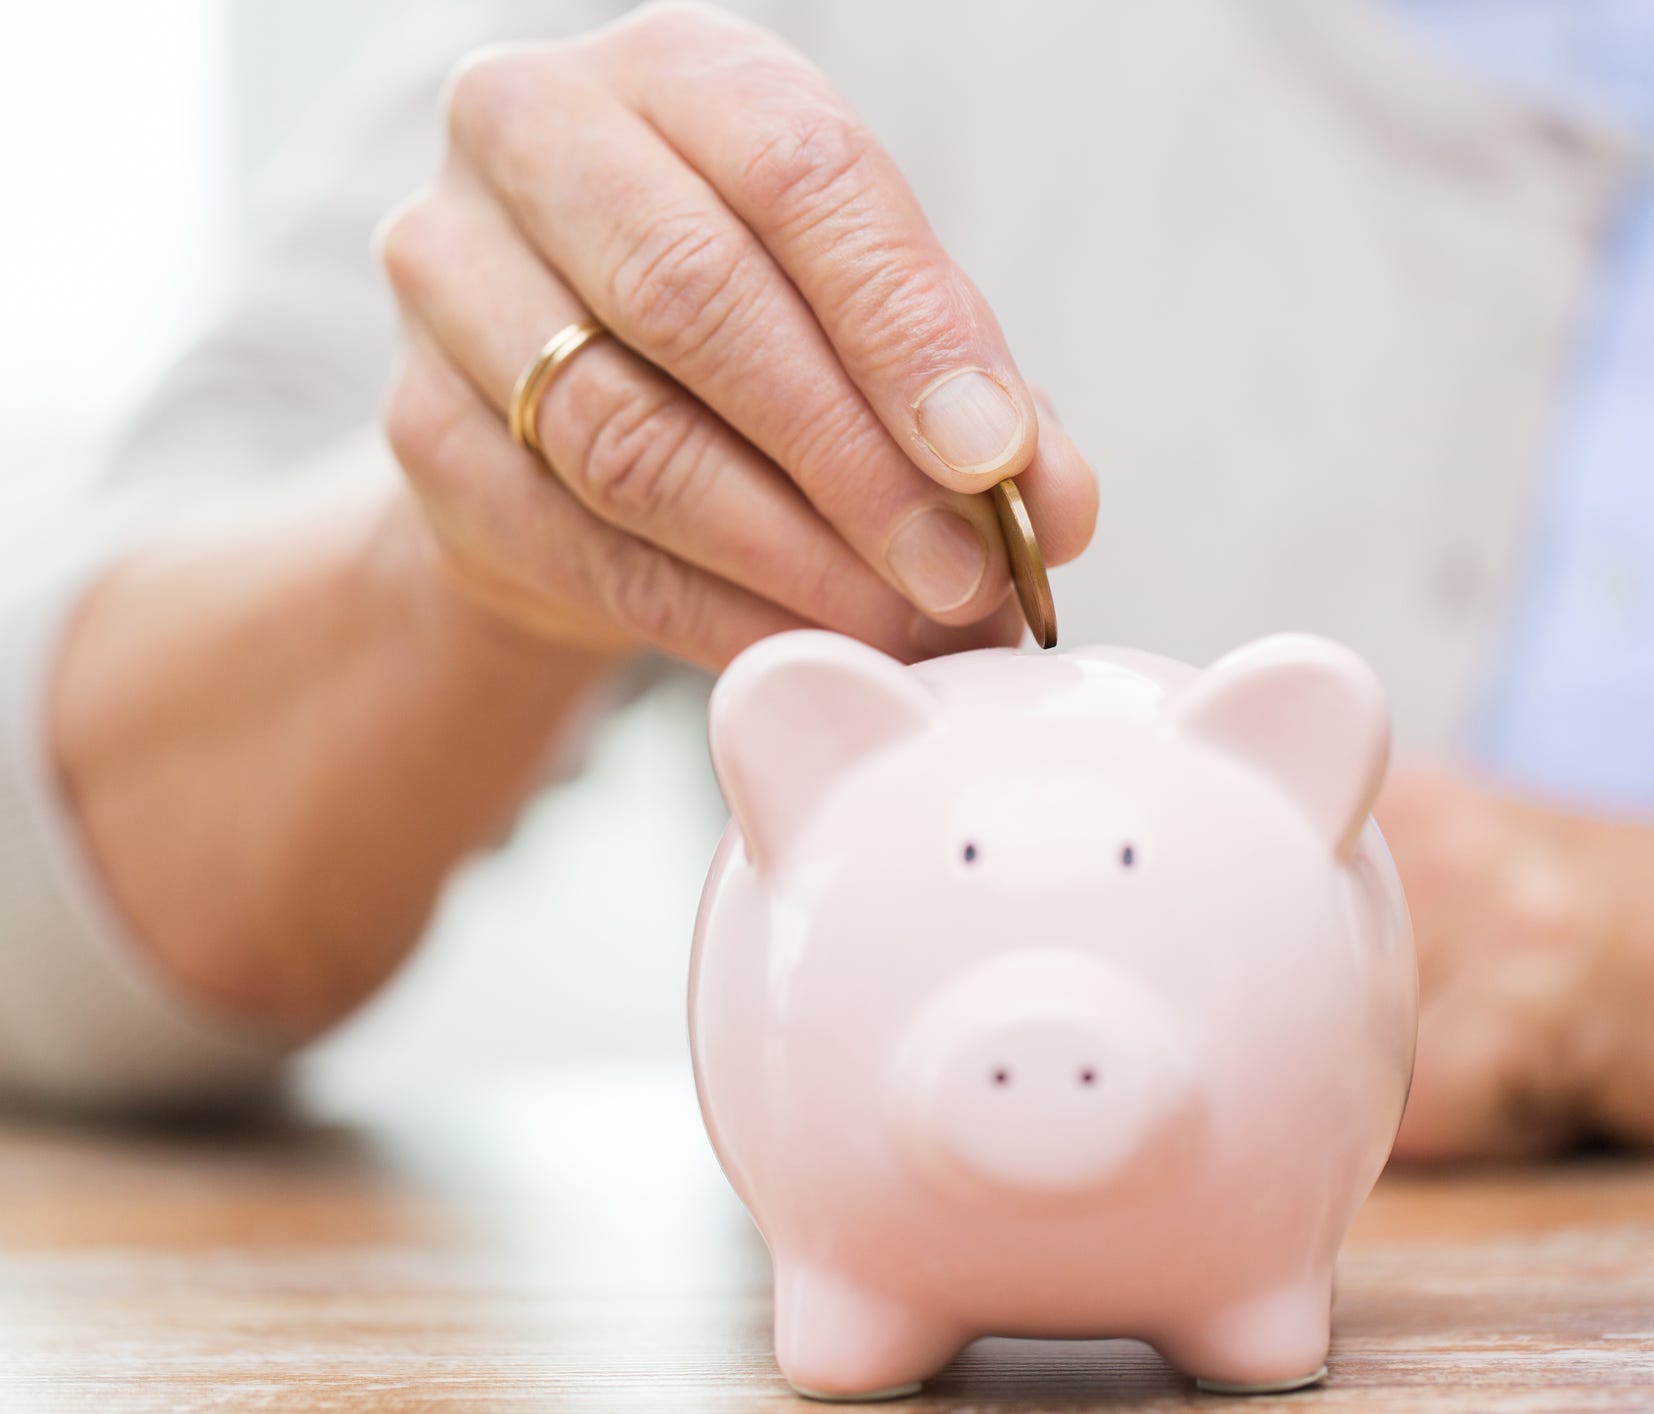 Nearly 40 million U.S. households (45%) have no retirement assets, according to a recent report by the National Institute on Retirement Security, and half of those households are headed by someone aged between 45 and 65.